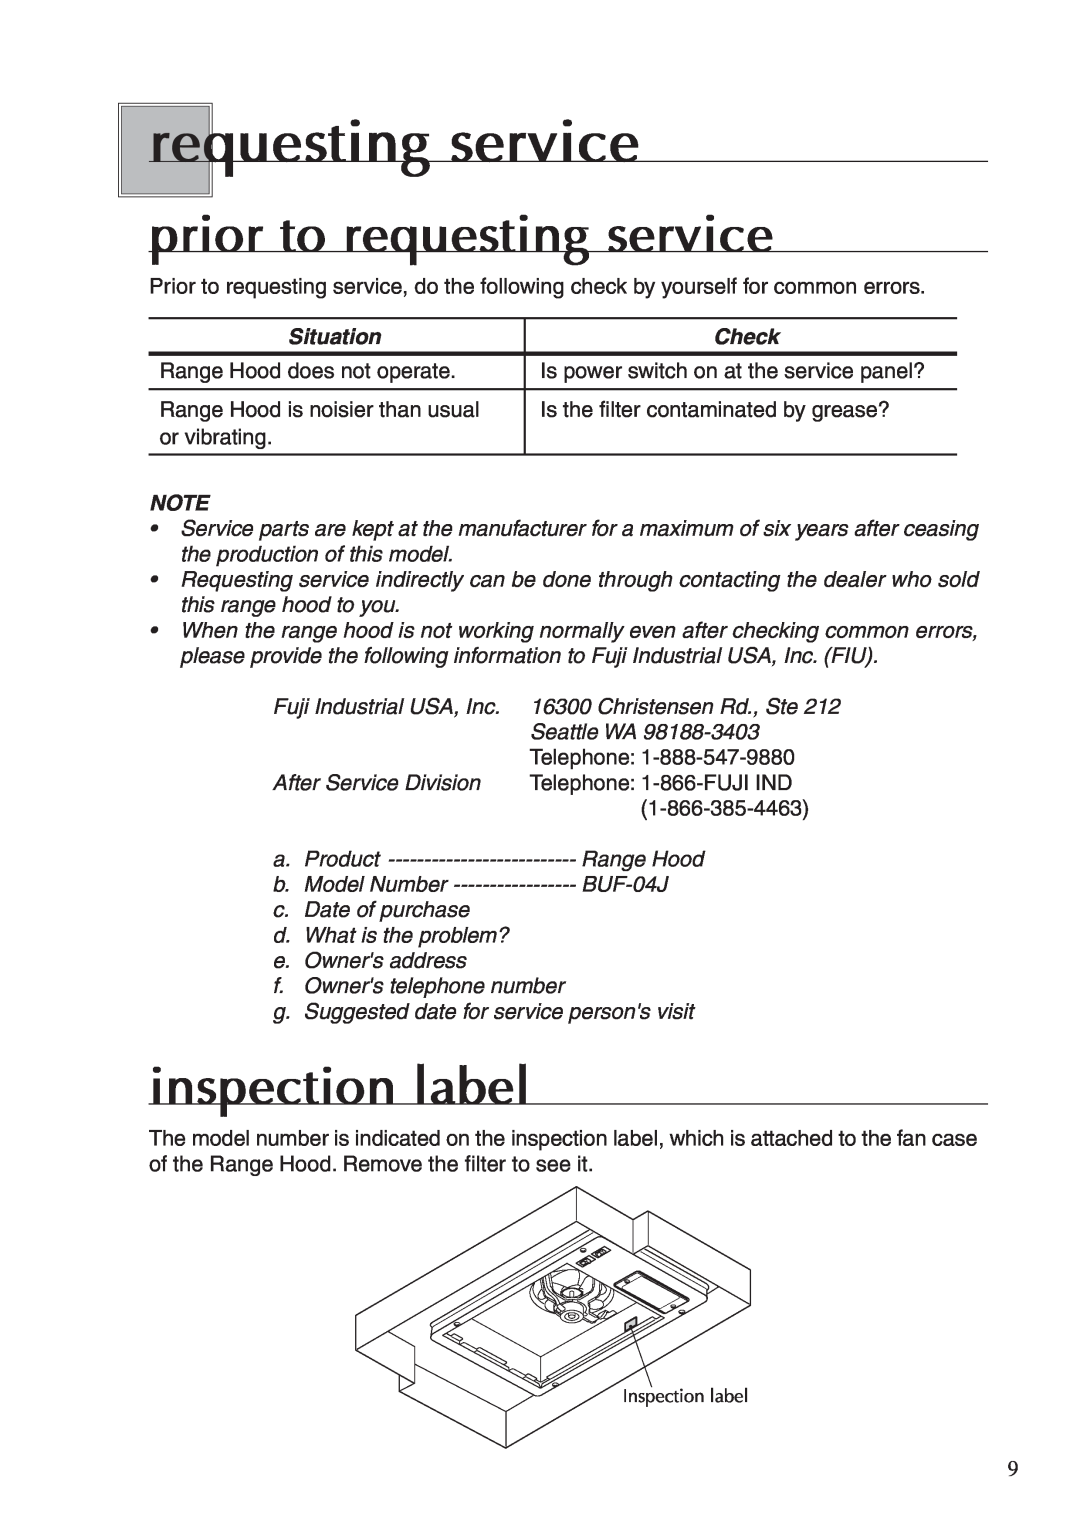 Fujioh BUF-04J operation manual requestingservice, prior to requesting service, inspection label, Situation, Check 